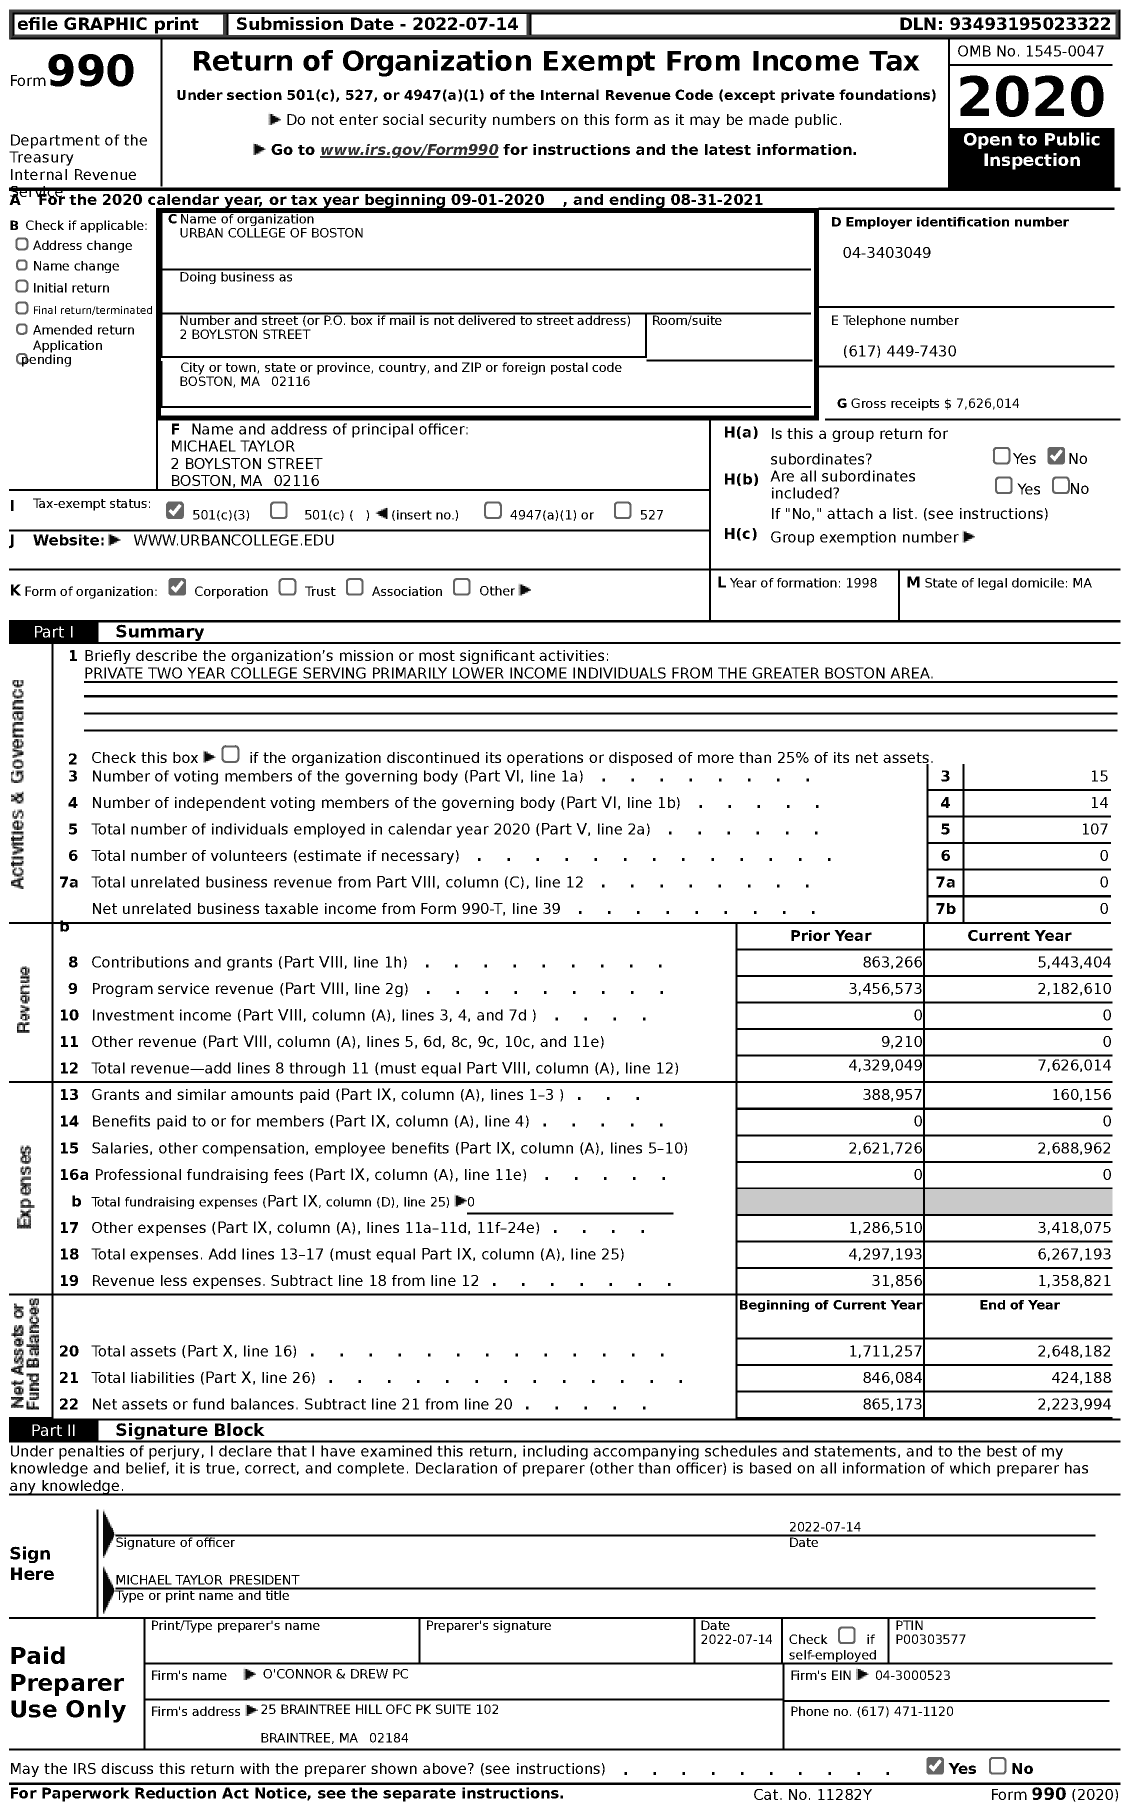 Image of first page of 2020 Form 990 for Urban College of Boston (UCB)